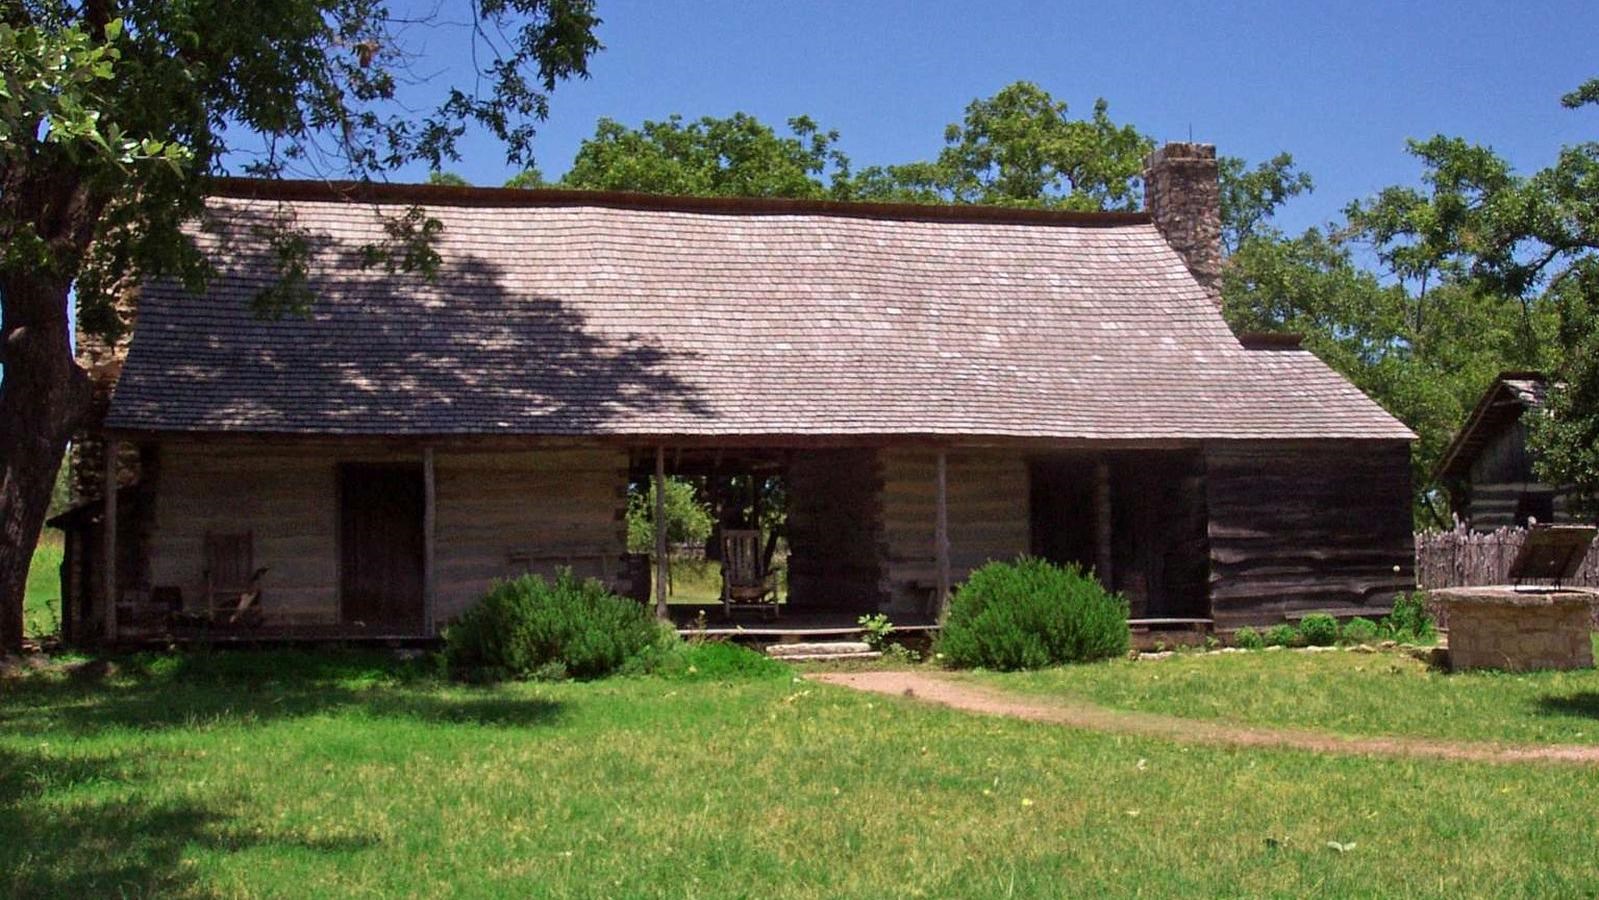 A log cabin with two rooms separated by a breezeway sits on green grass under a blue sky.